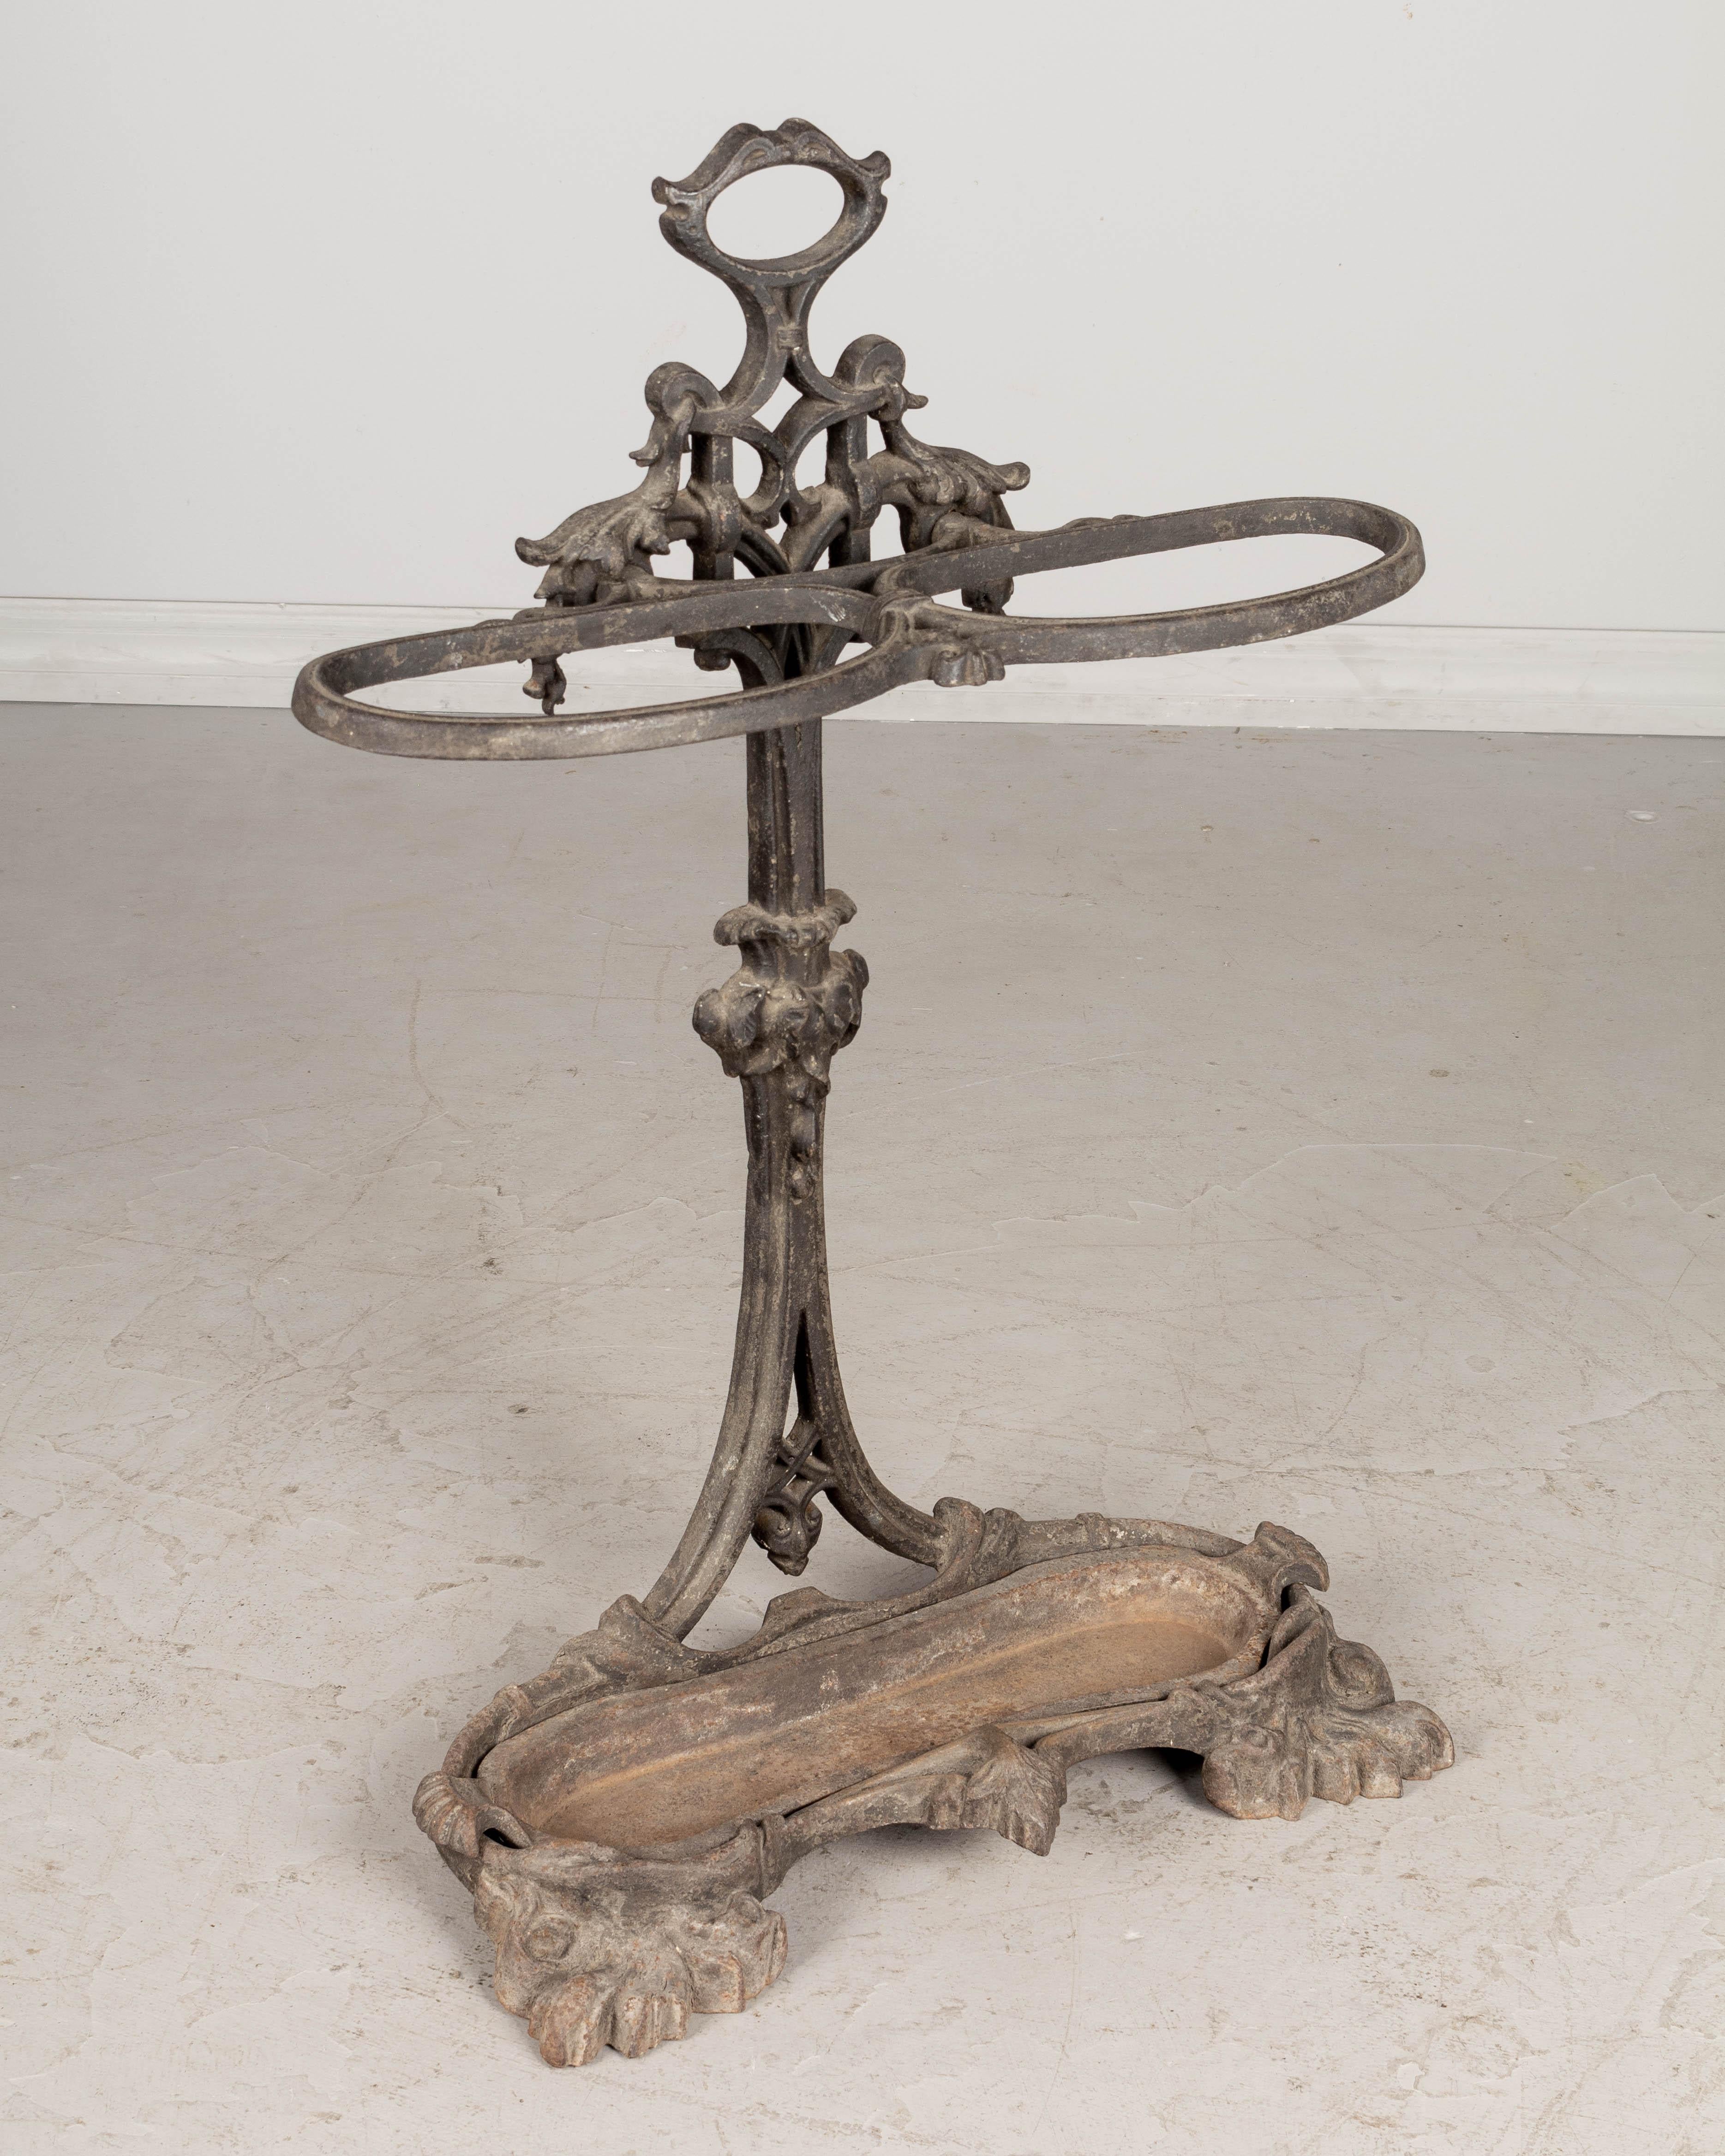 A 19th century English cast iron umbrella stand with faded black painted finish with rusty patina. Detailed iron work with oval loops to hold the umbrellas upright and a removable drip tray. Foundry stamp under drip tray: Coalbrookdale. Weight: 30